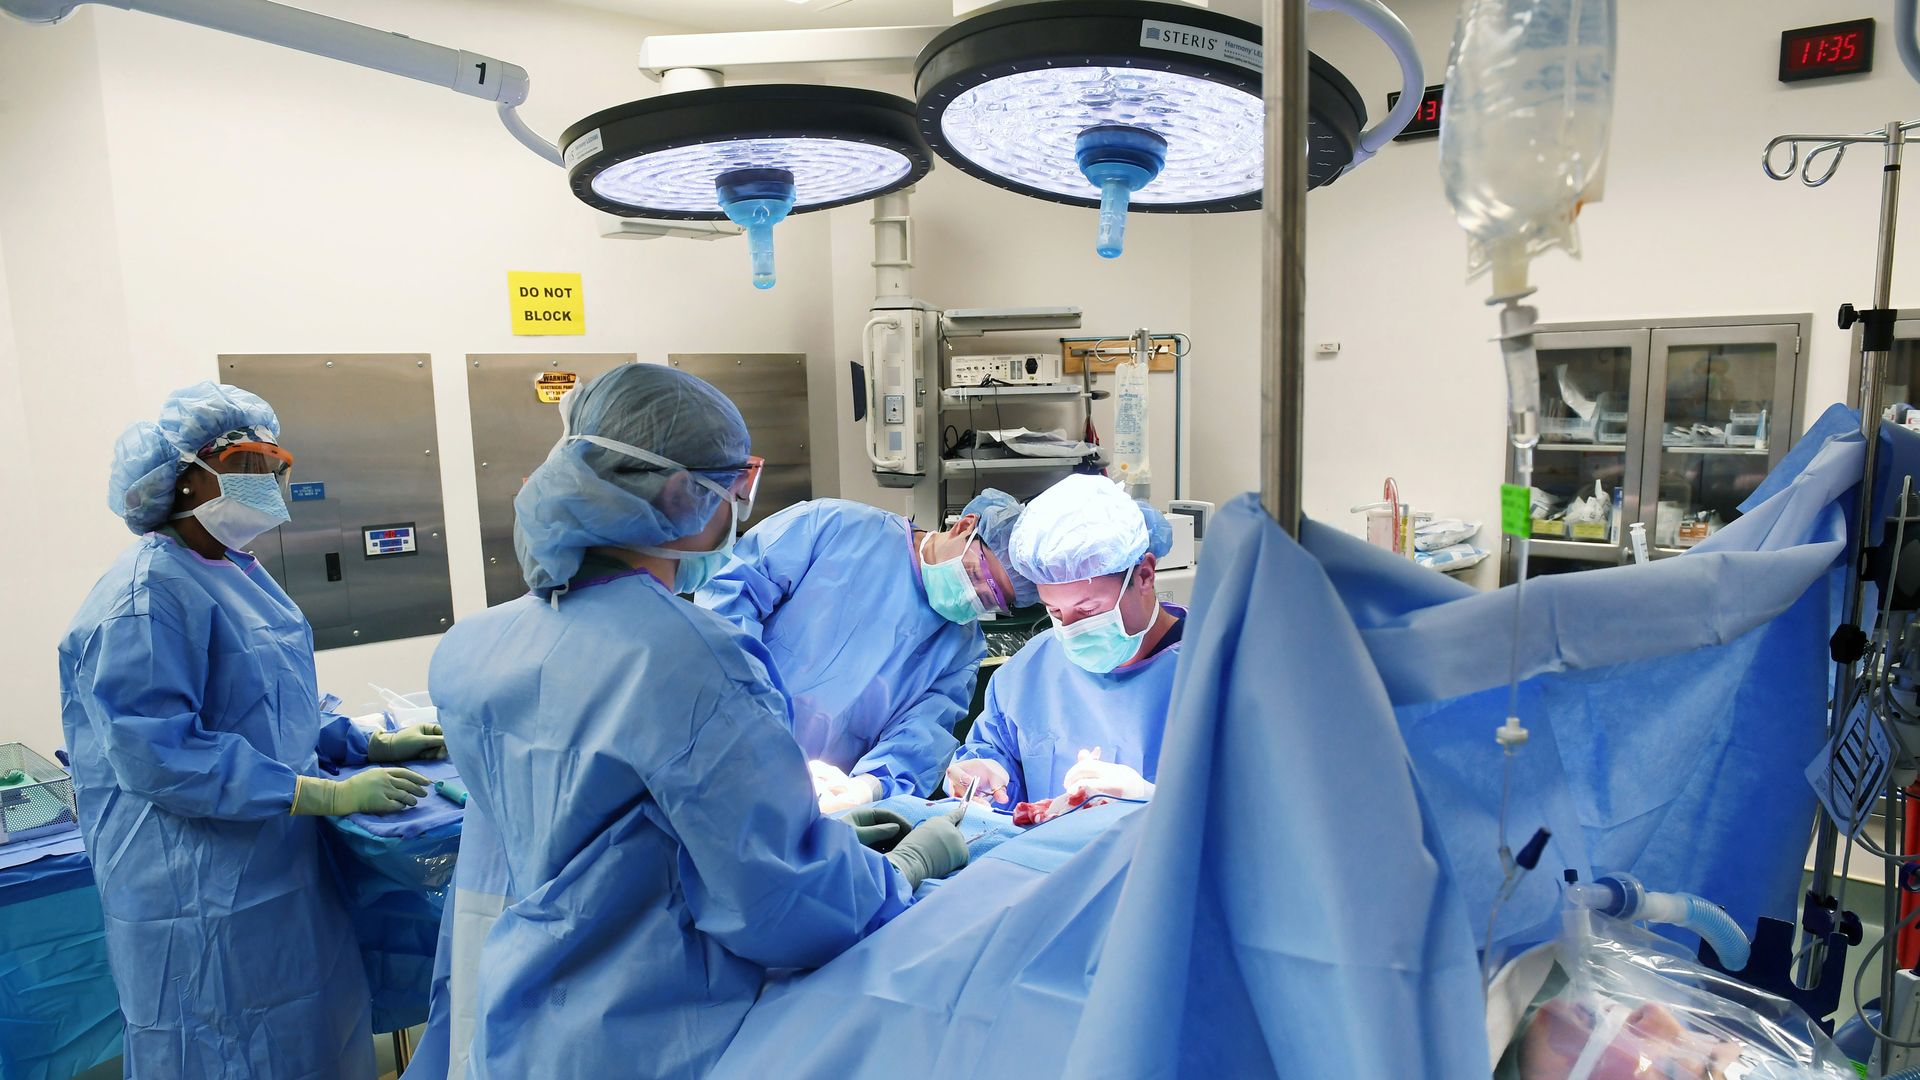 Doctors and nurses in blue gowns and masks operate around a surgical table in an operating room.